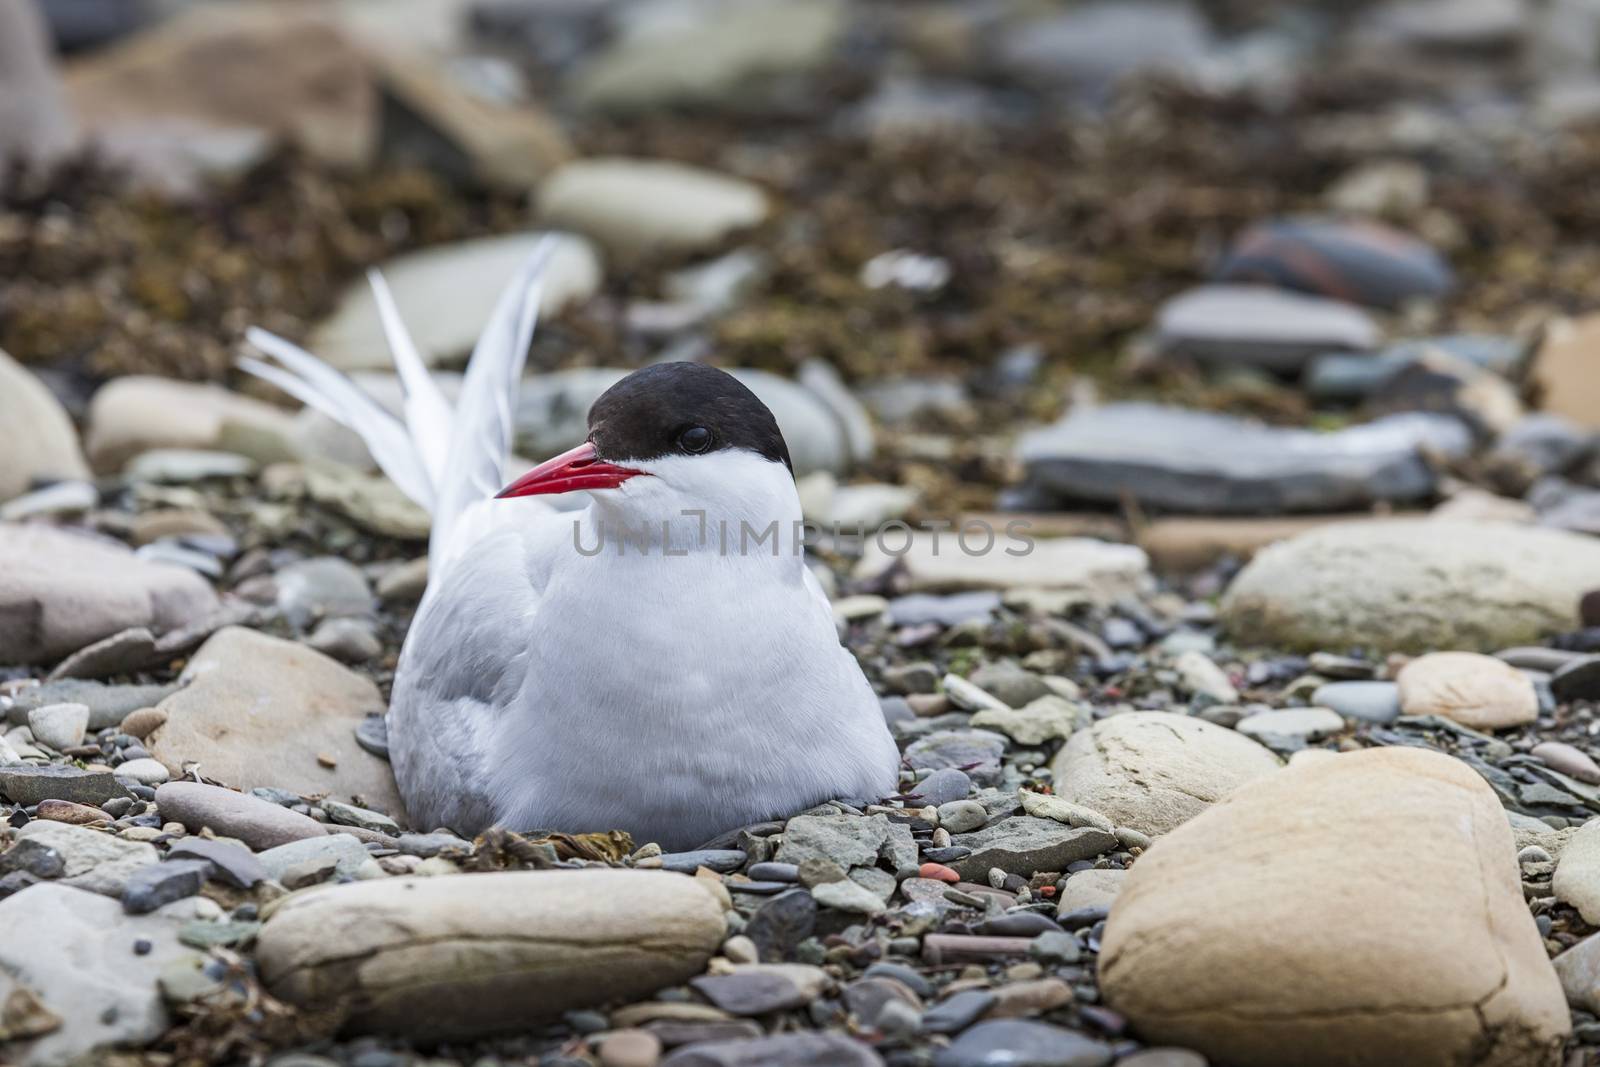 Arctic Tern standing near her nest protecting her egg from predators

